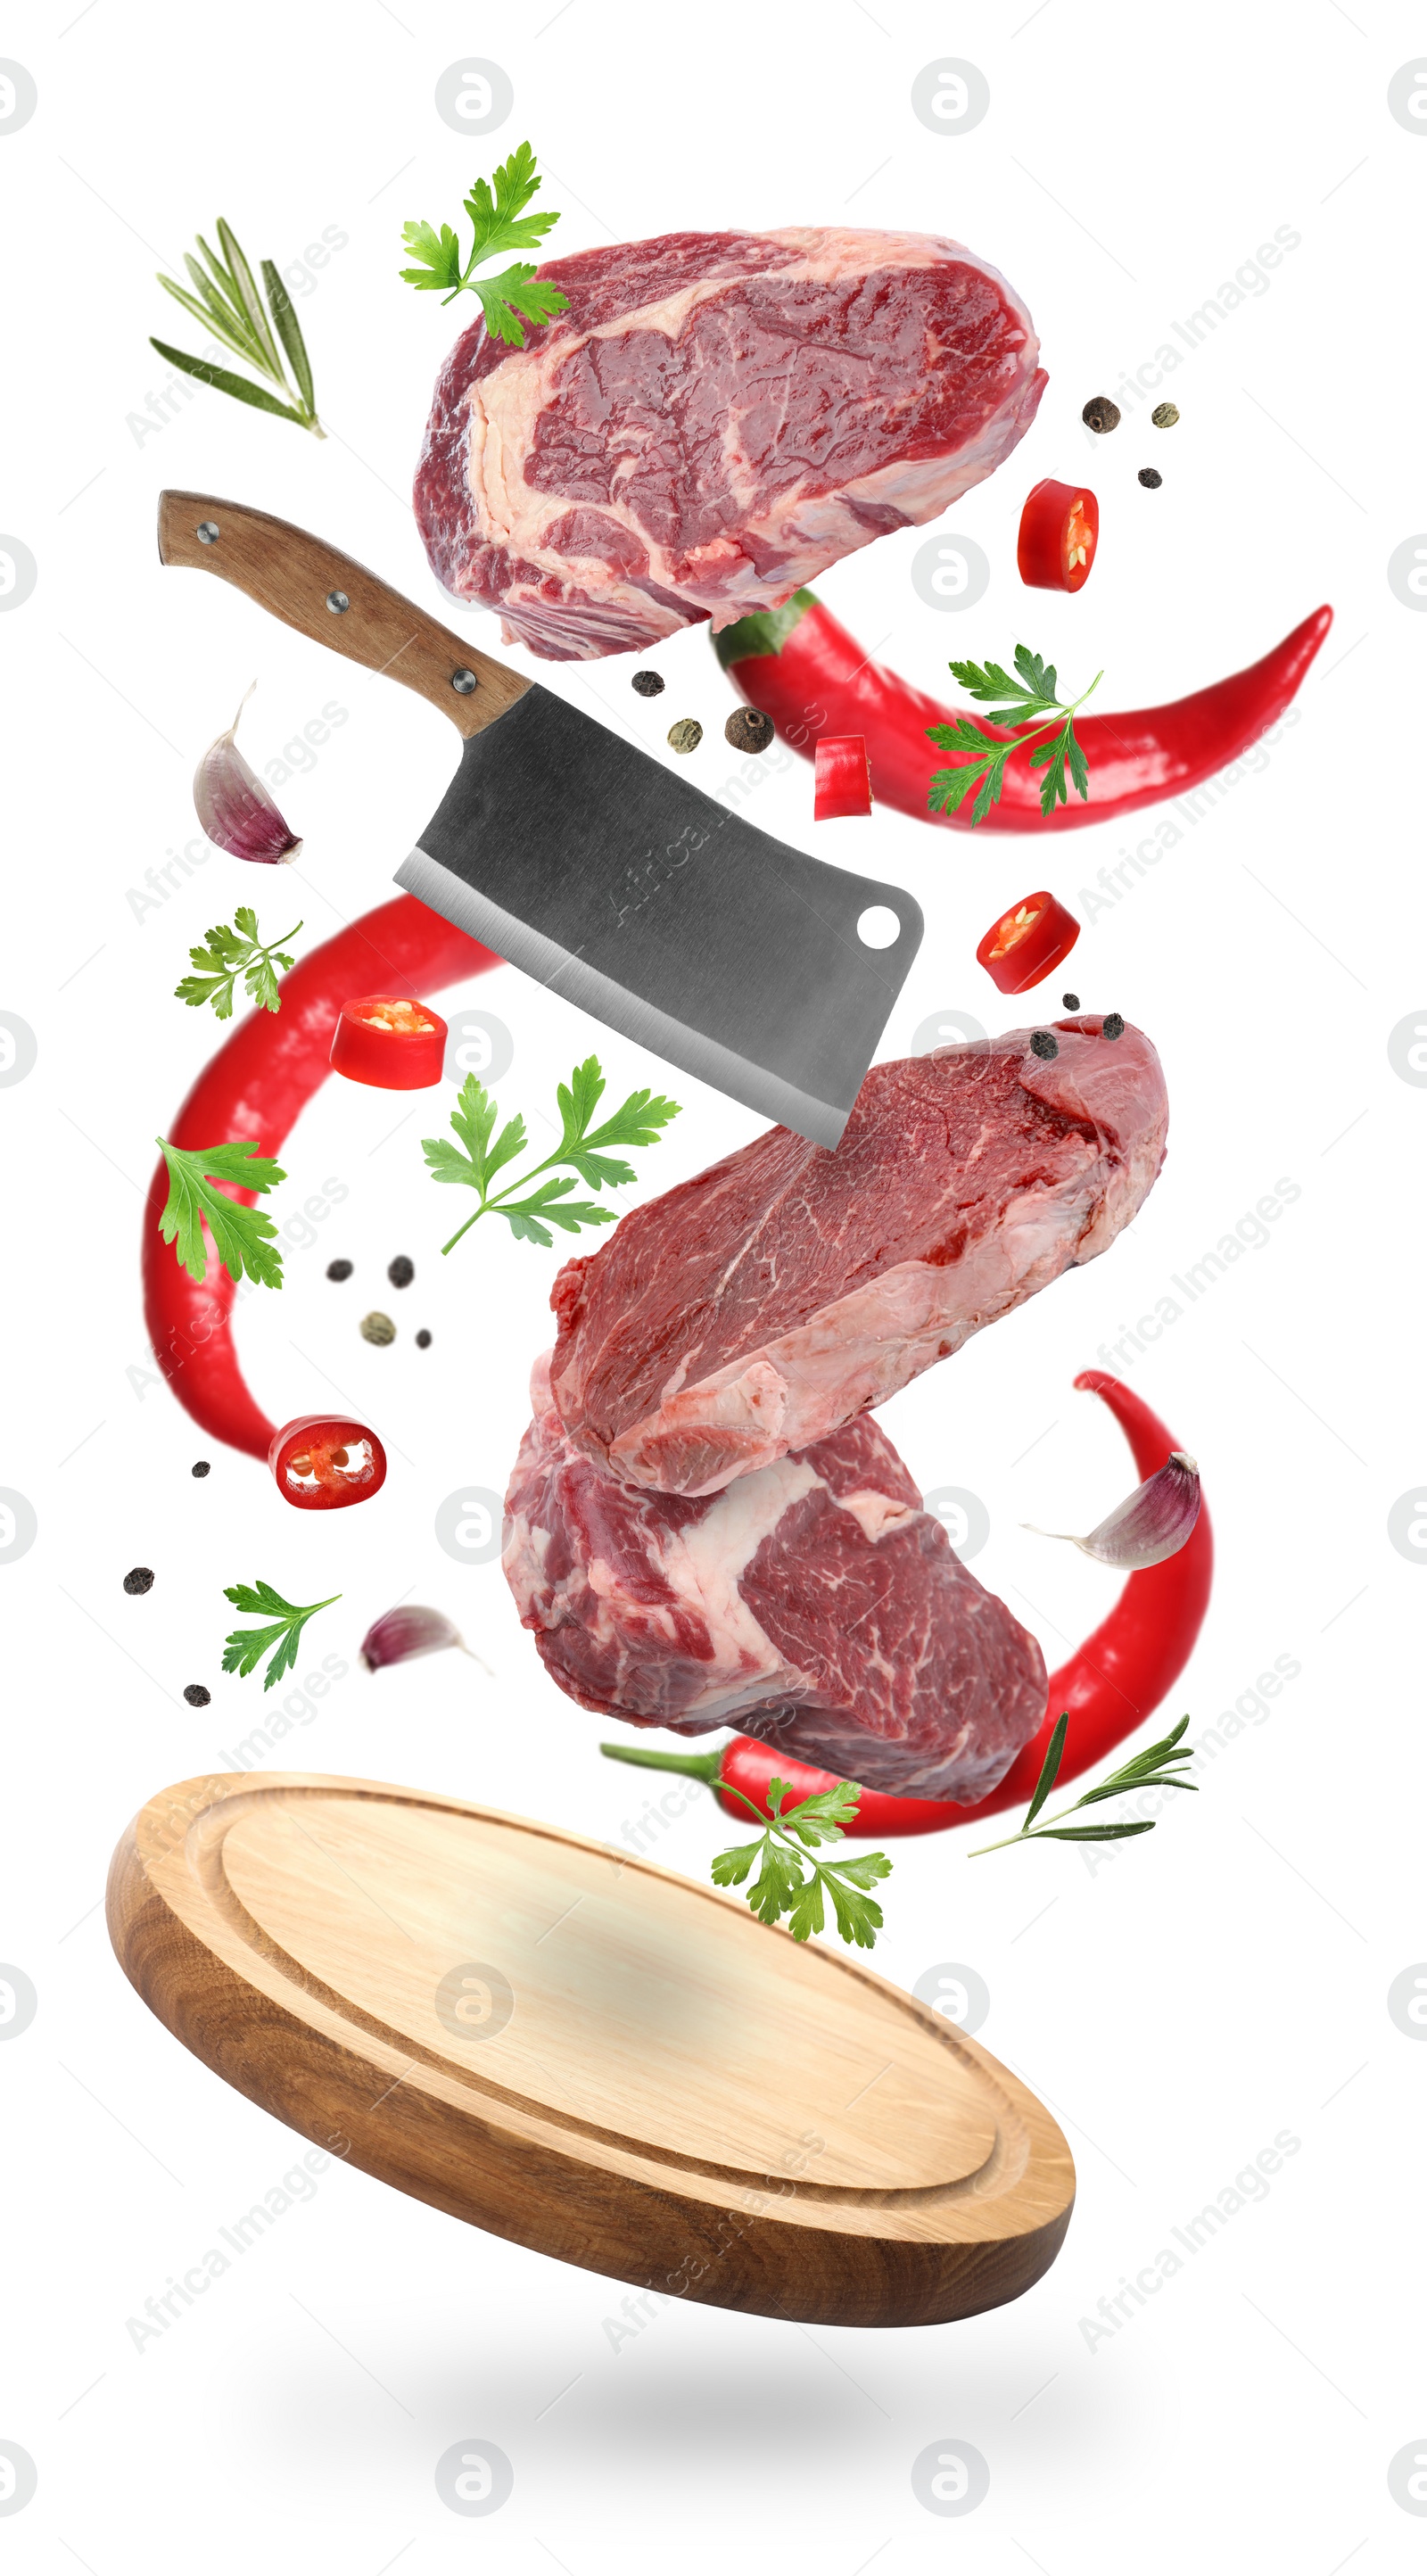 Image of Beef meat, different spices, cleaver knife and board falling on white background